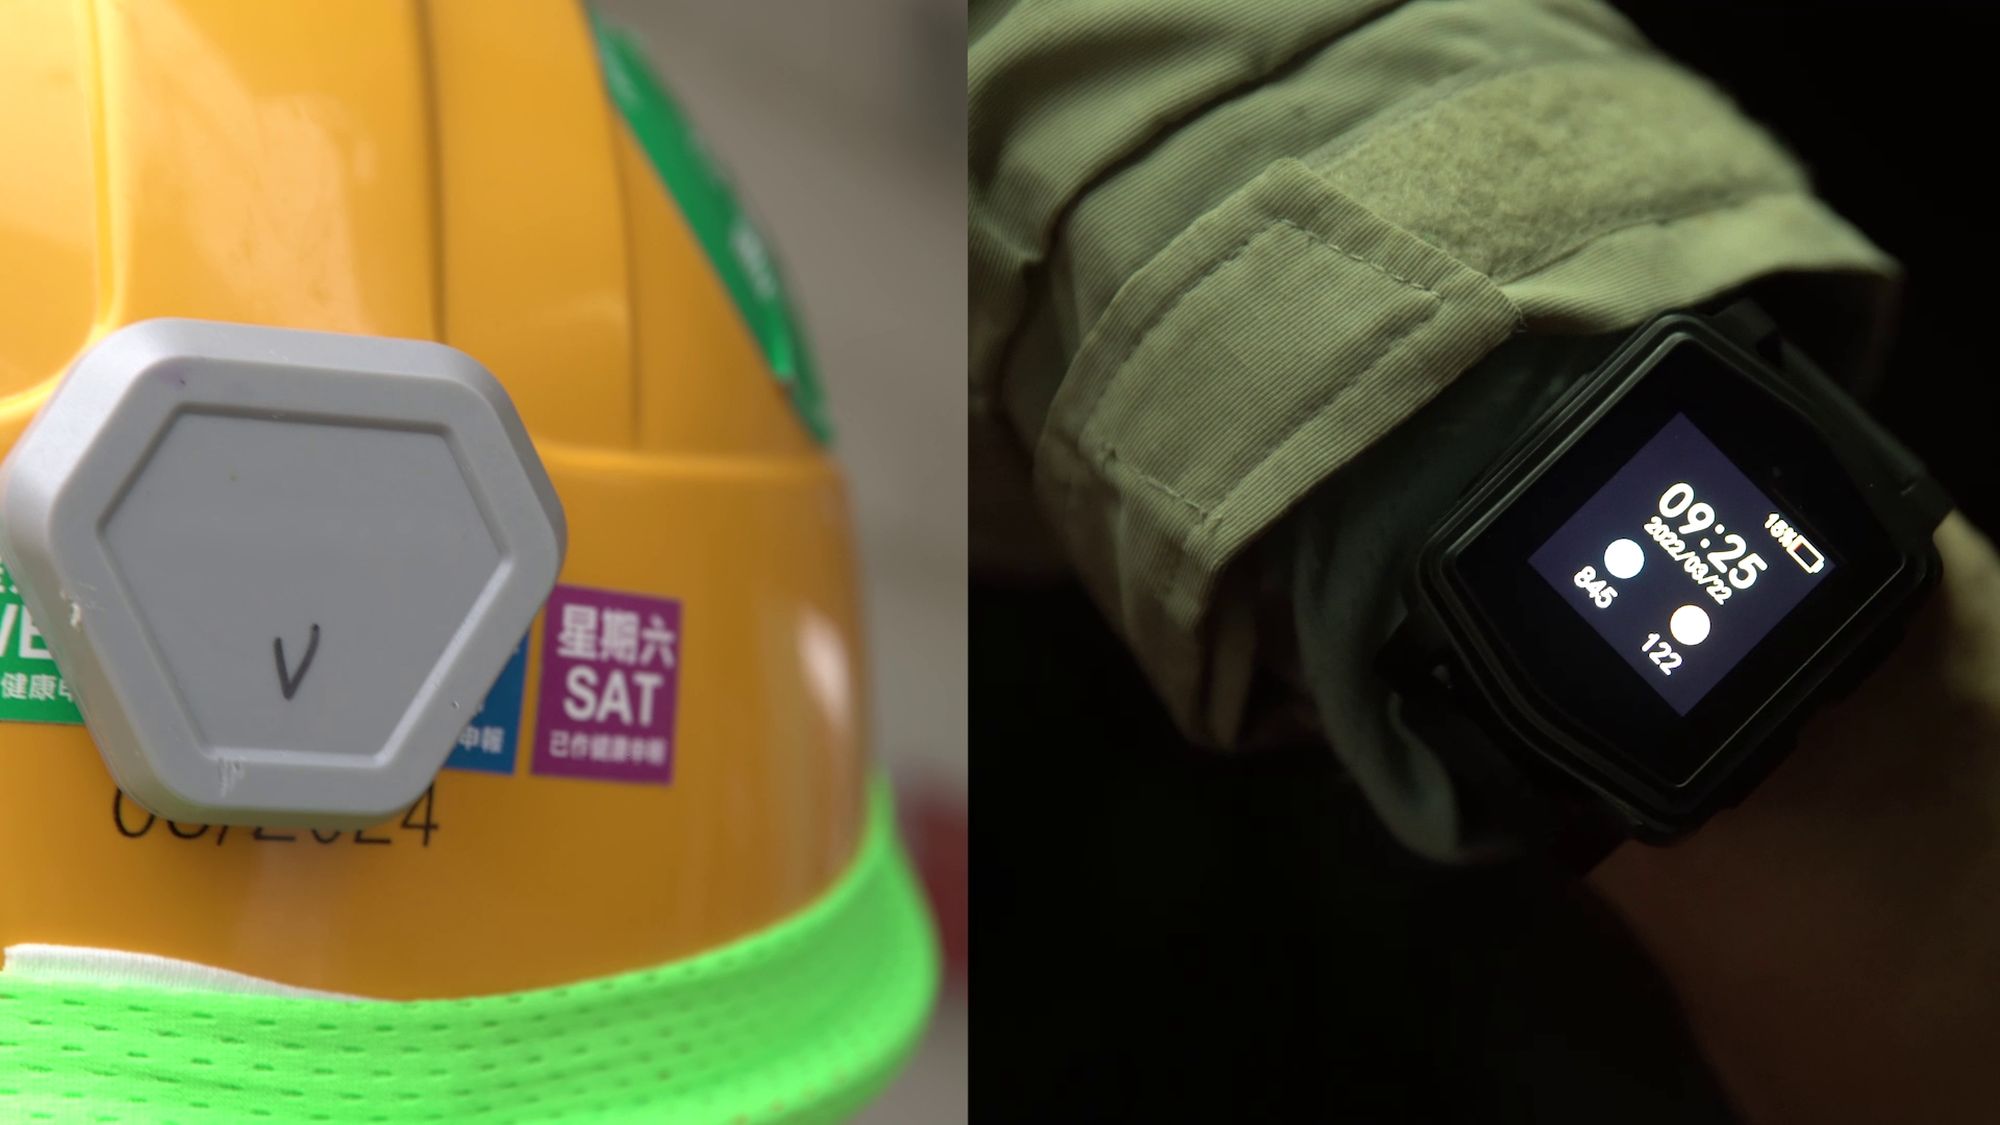 The smart safety helmet and the smart watch can send a timely alert to safety management staff and workers to help monitor workers’ safety.